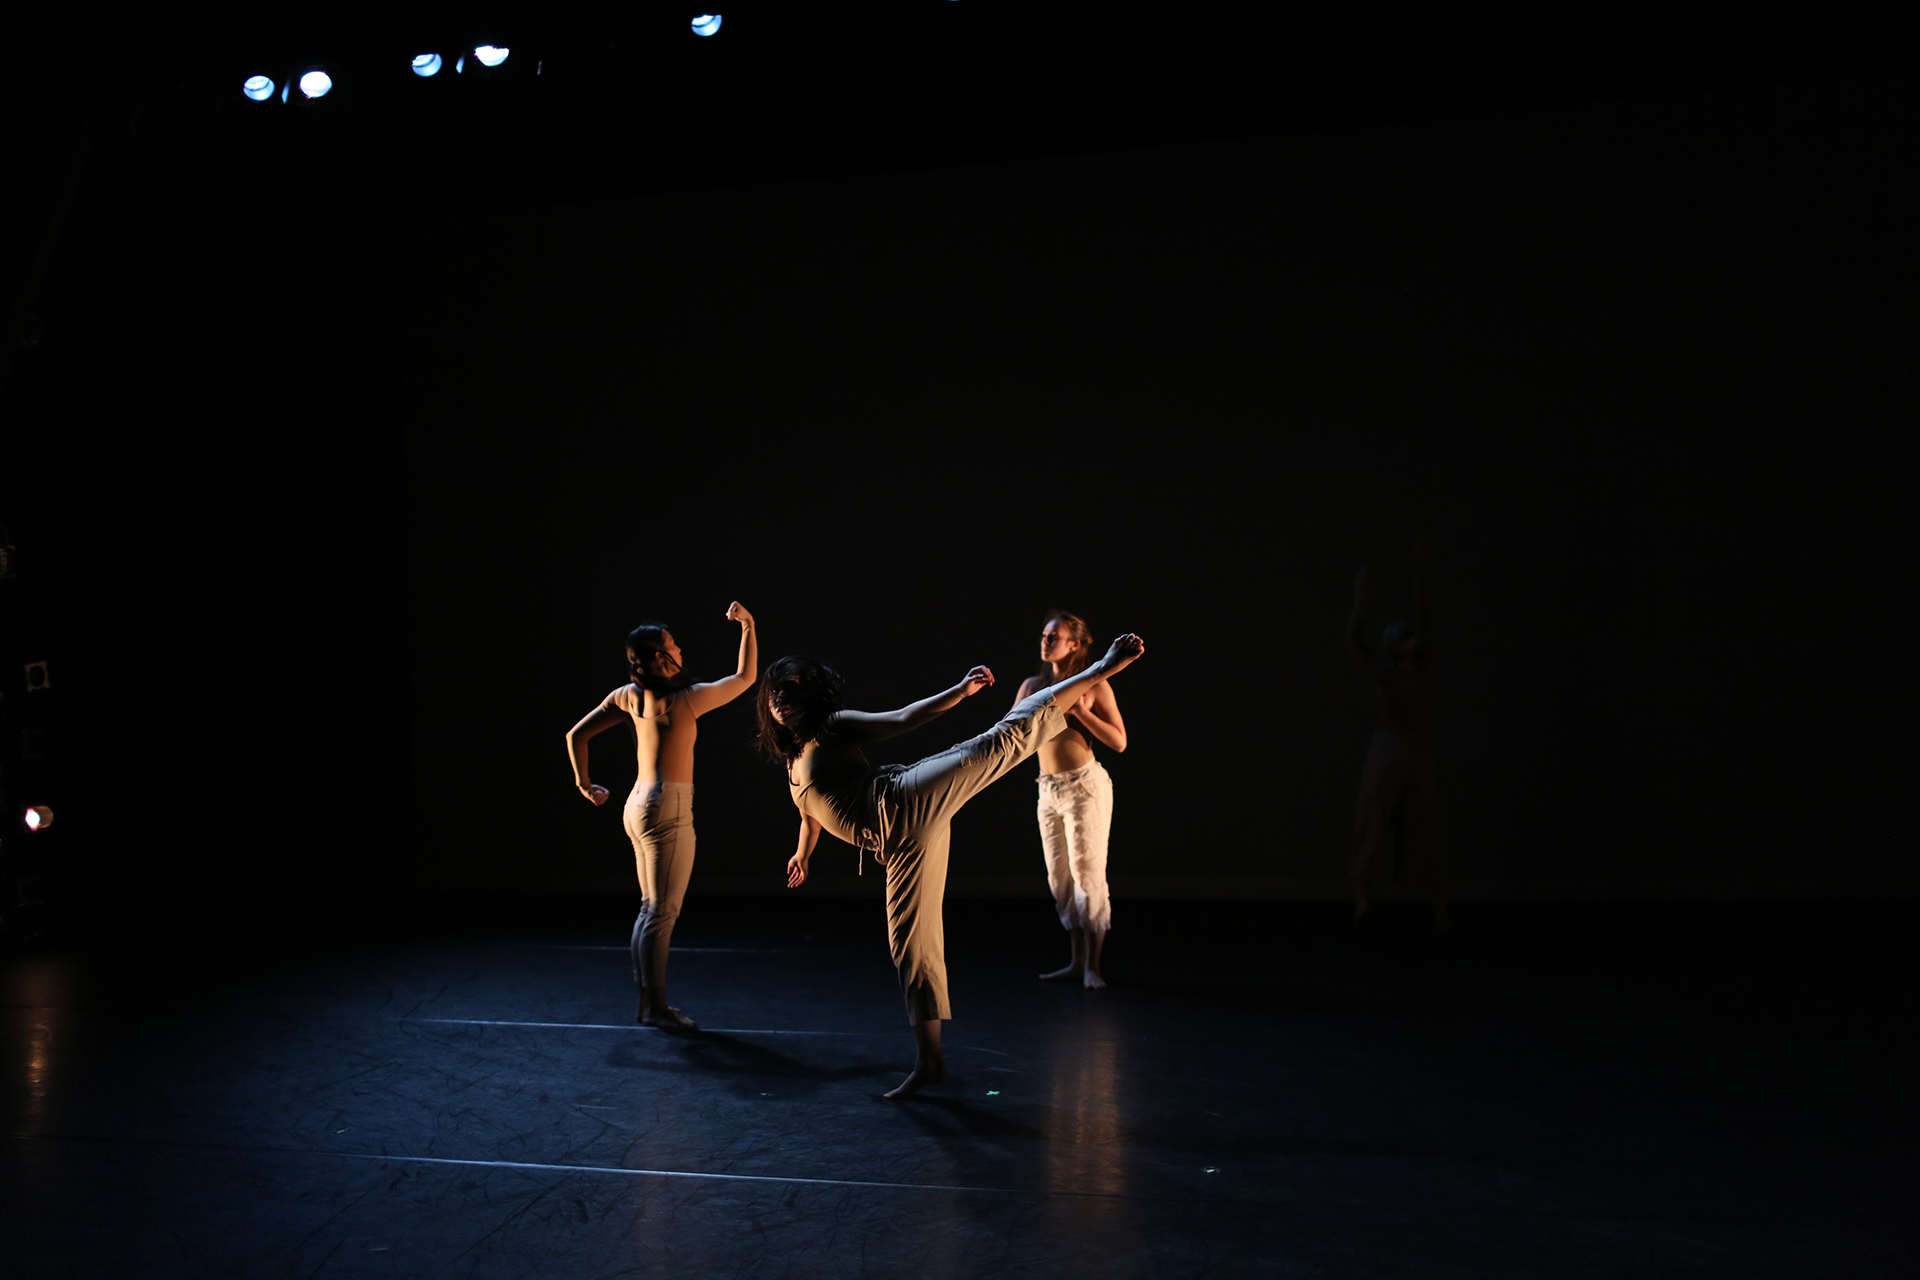 "Bare Hold" Choreographed by Dean Husted in collaboration with the dancers